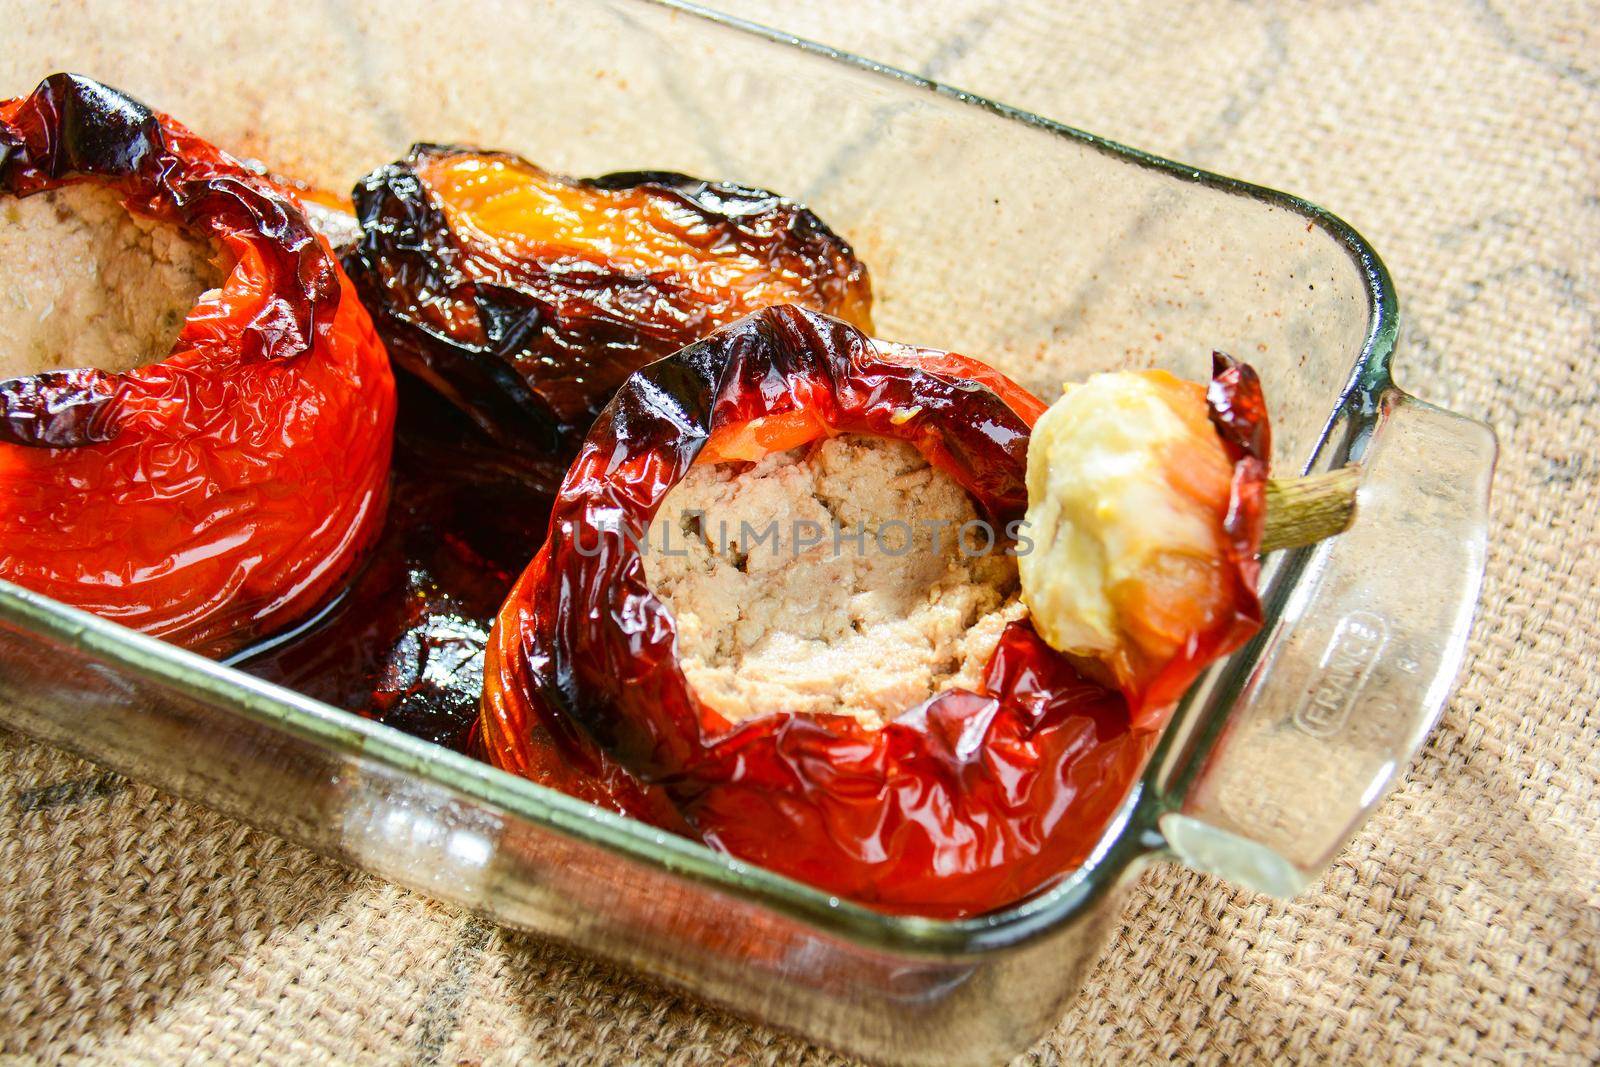 Italian cuisine, baked stuffed peppers with tuna capers and Parmesan cheese